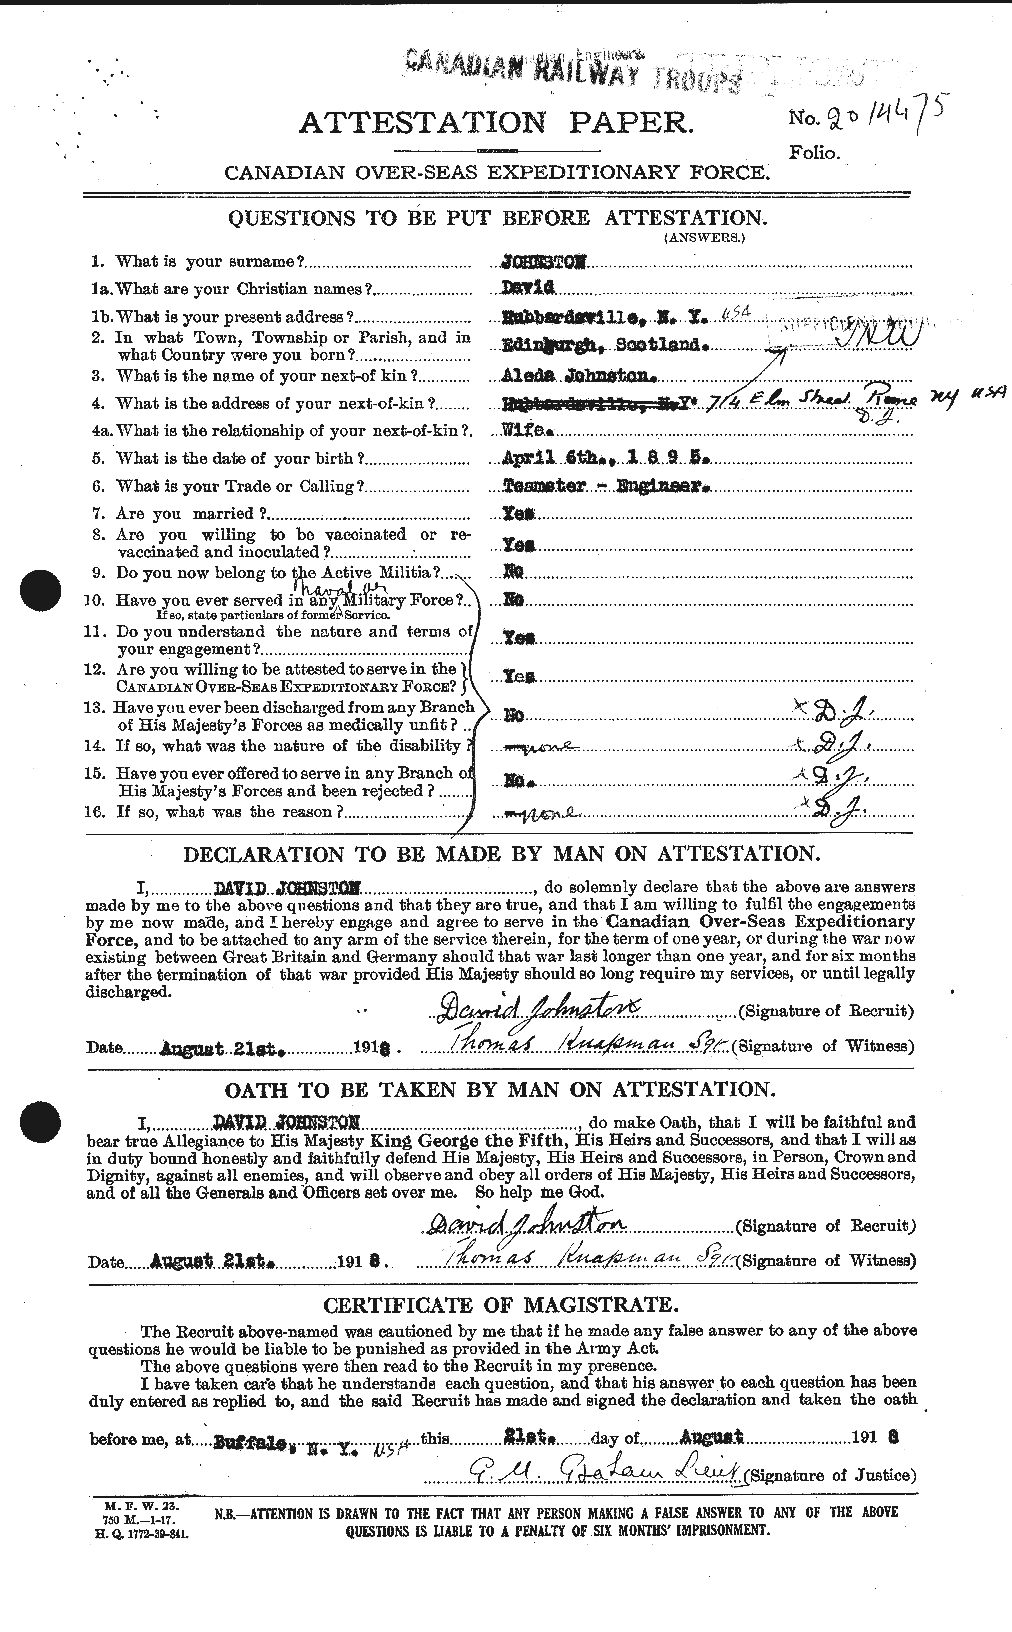 Personnel Records of the First World War - CEF 423151a